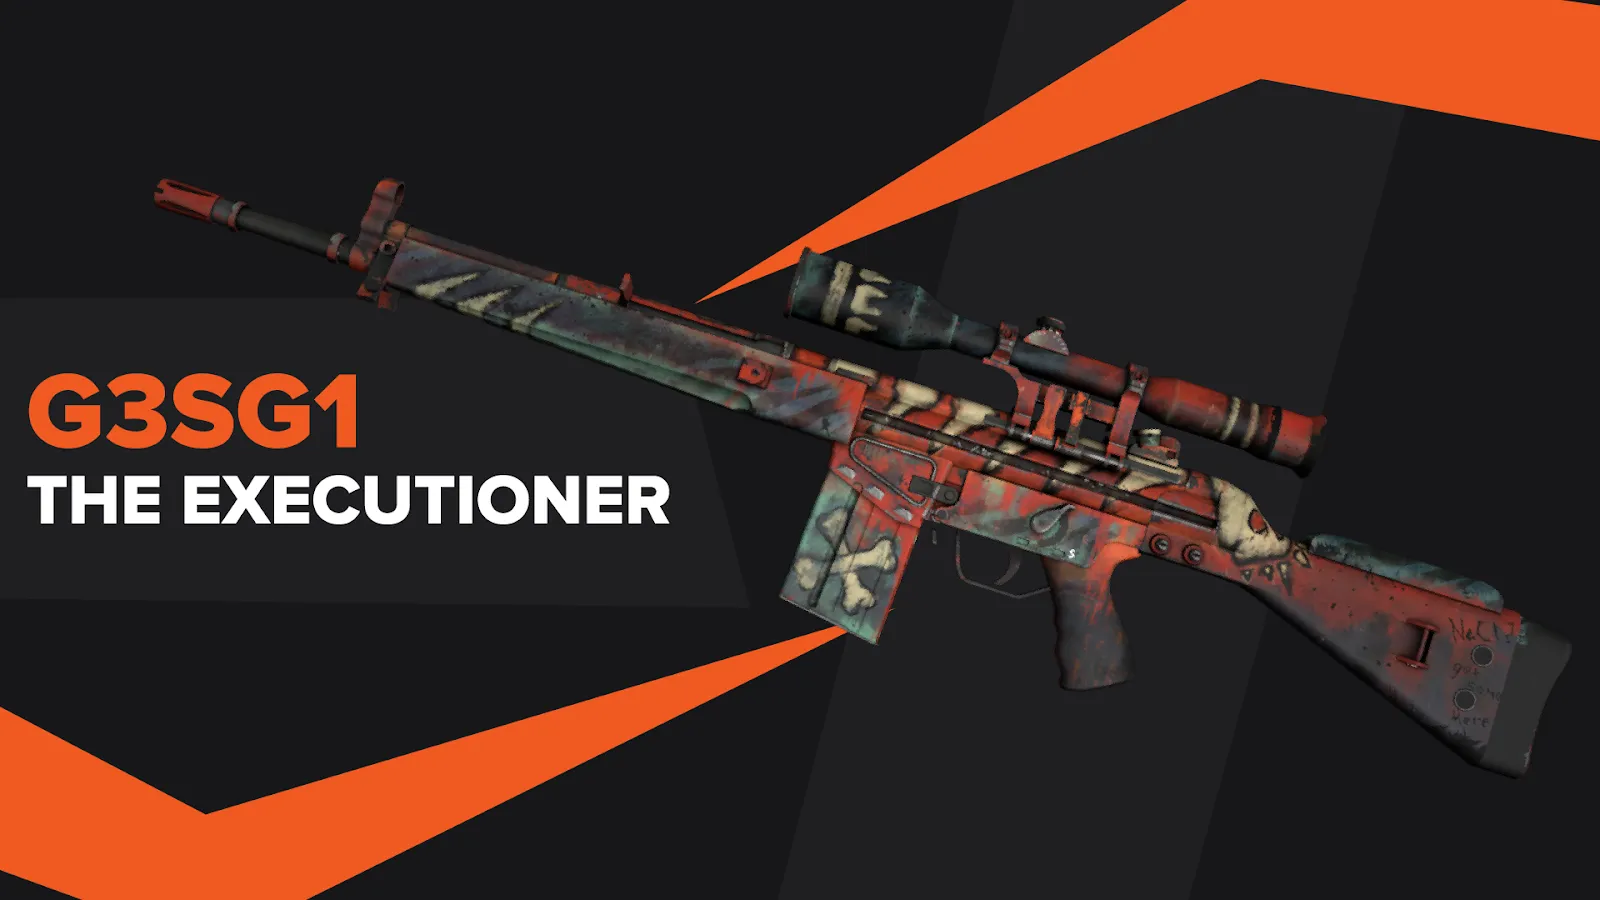 G3SG1 THE EXECUTIONER